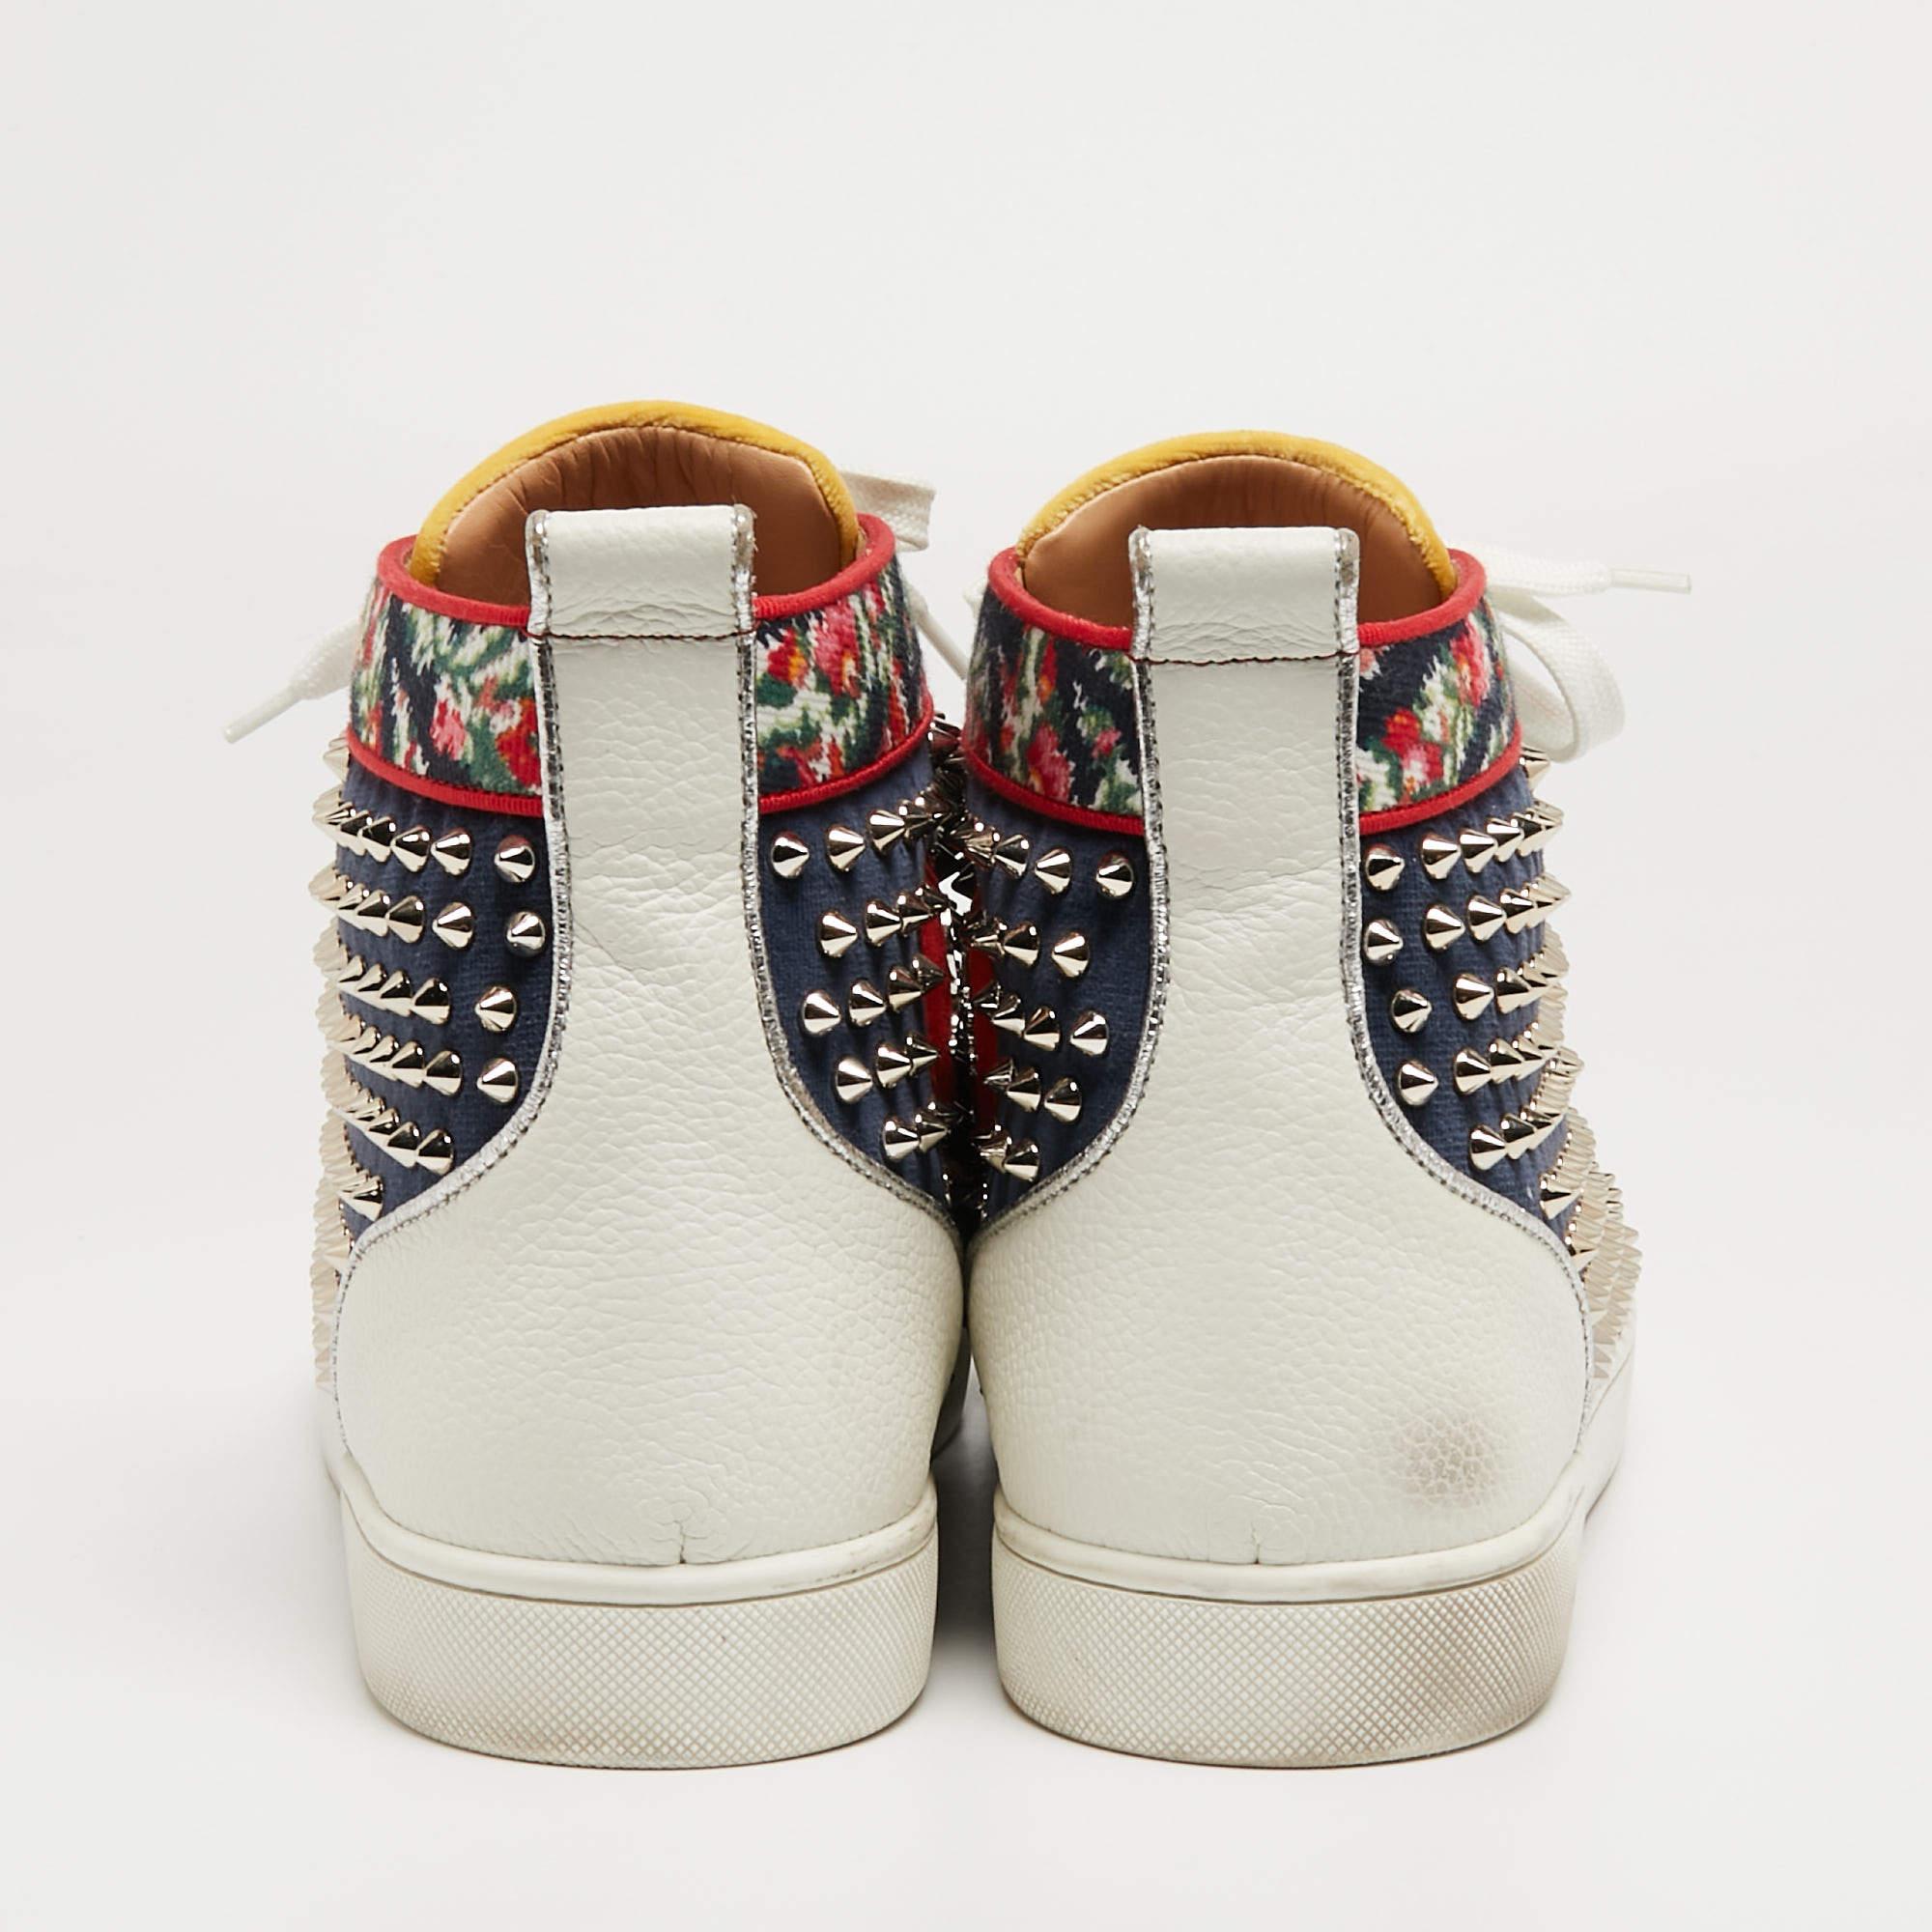 Christian Louboutin Tricolor Leather and Fabric Louis Spikes High-Top Sneakers S 2